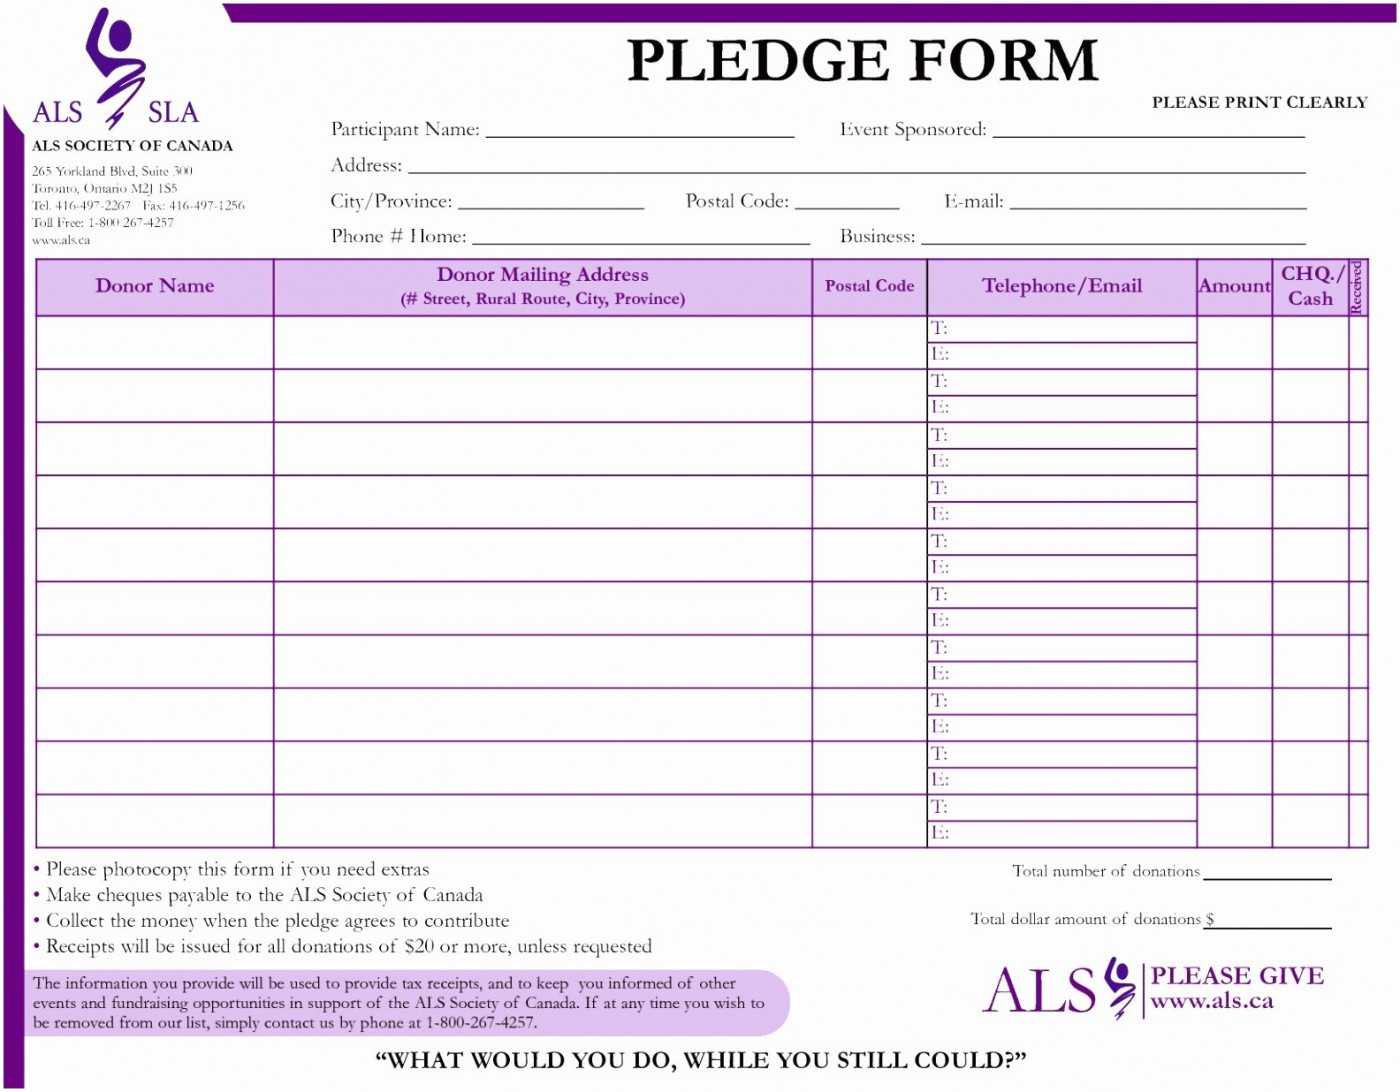 039 Pledge Card Template Word Best Of Fundraiser Form Pttyt Pertaining To Pledge Card Template For Church